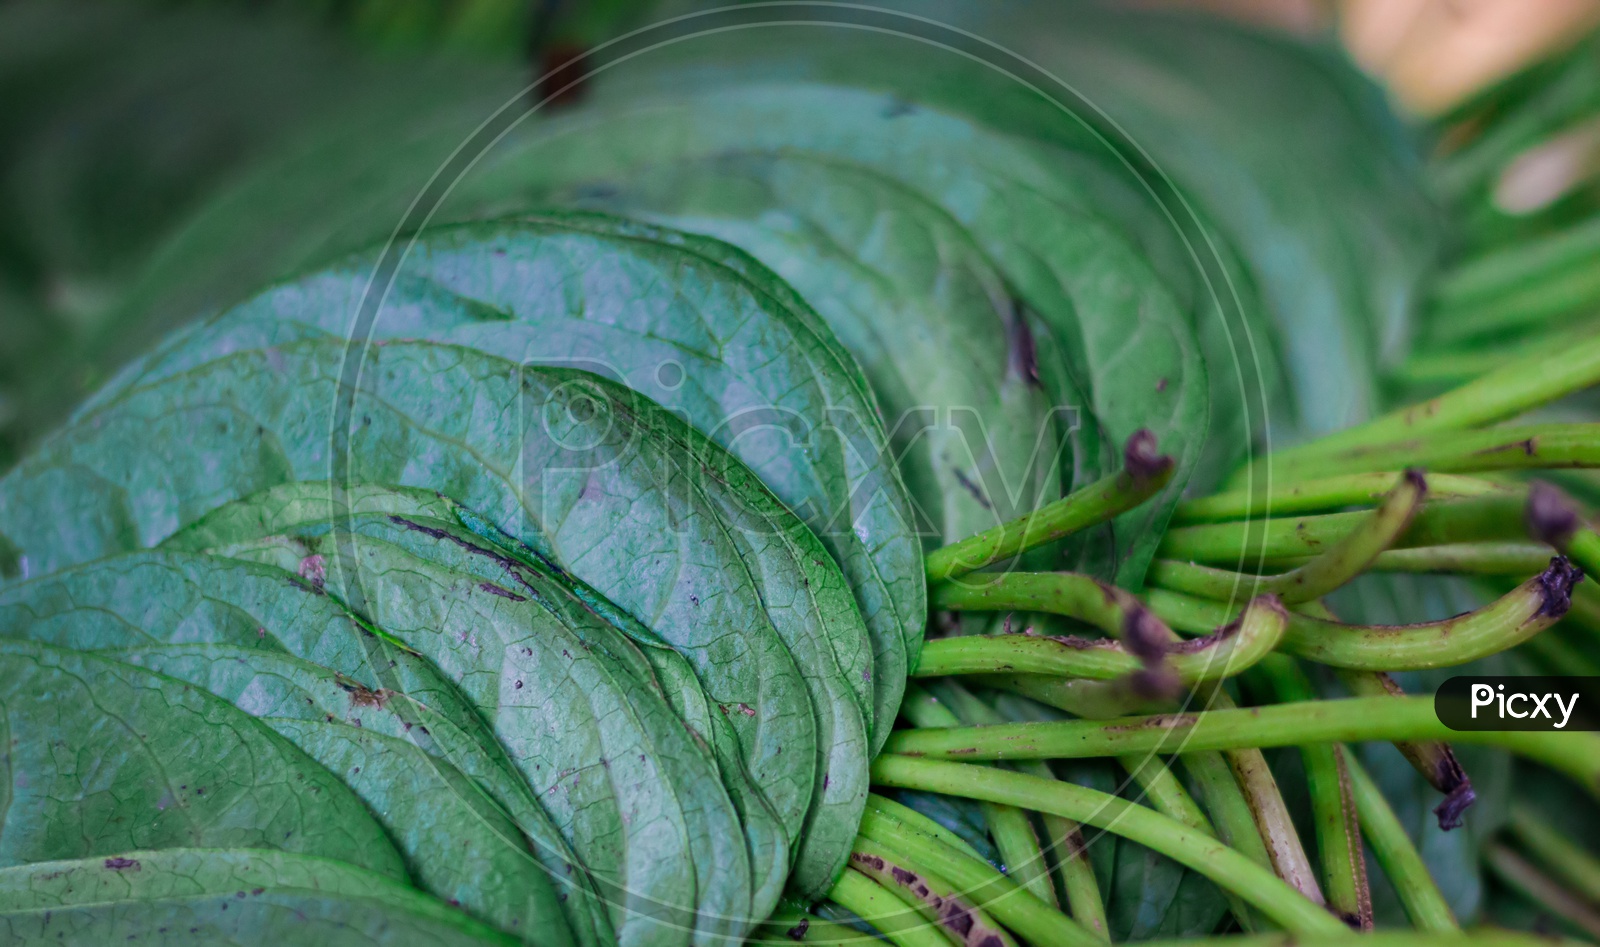 Betel Pan Leaves Stacked For Sale In Market In India Pan